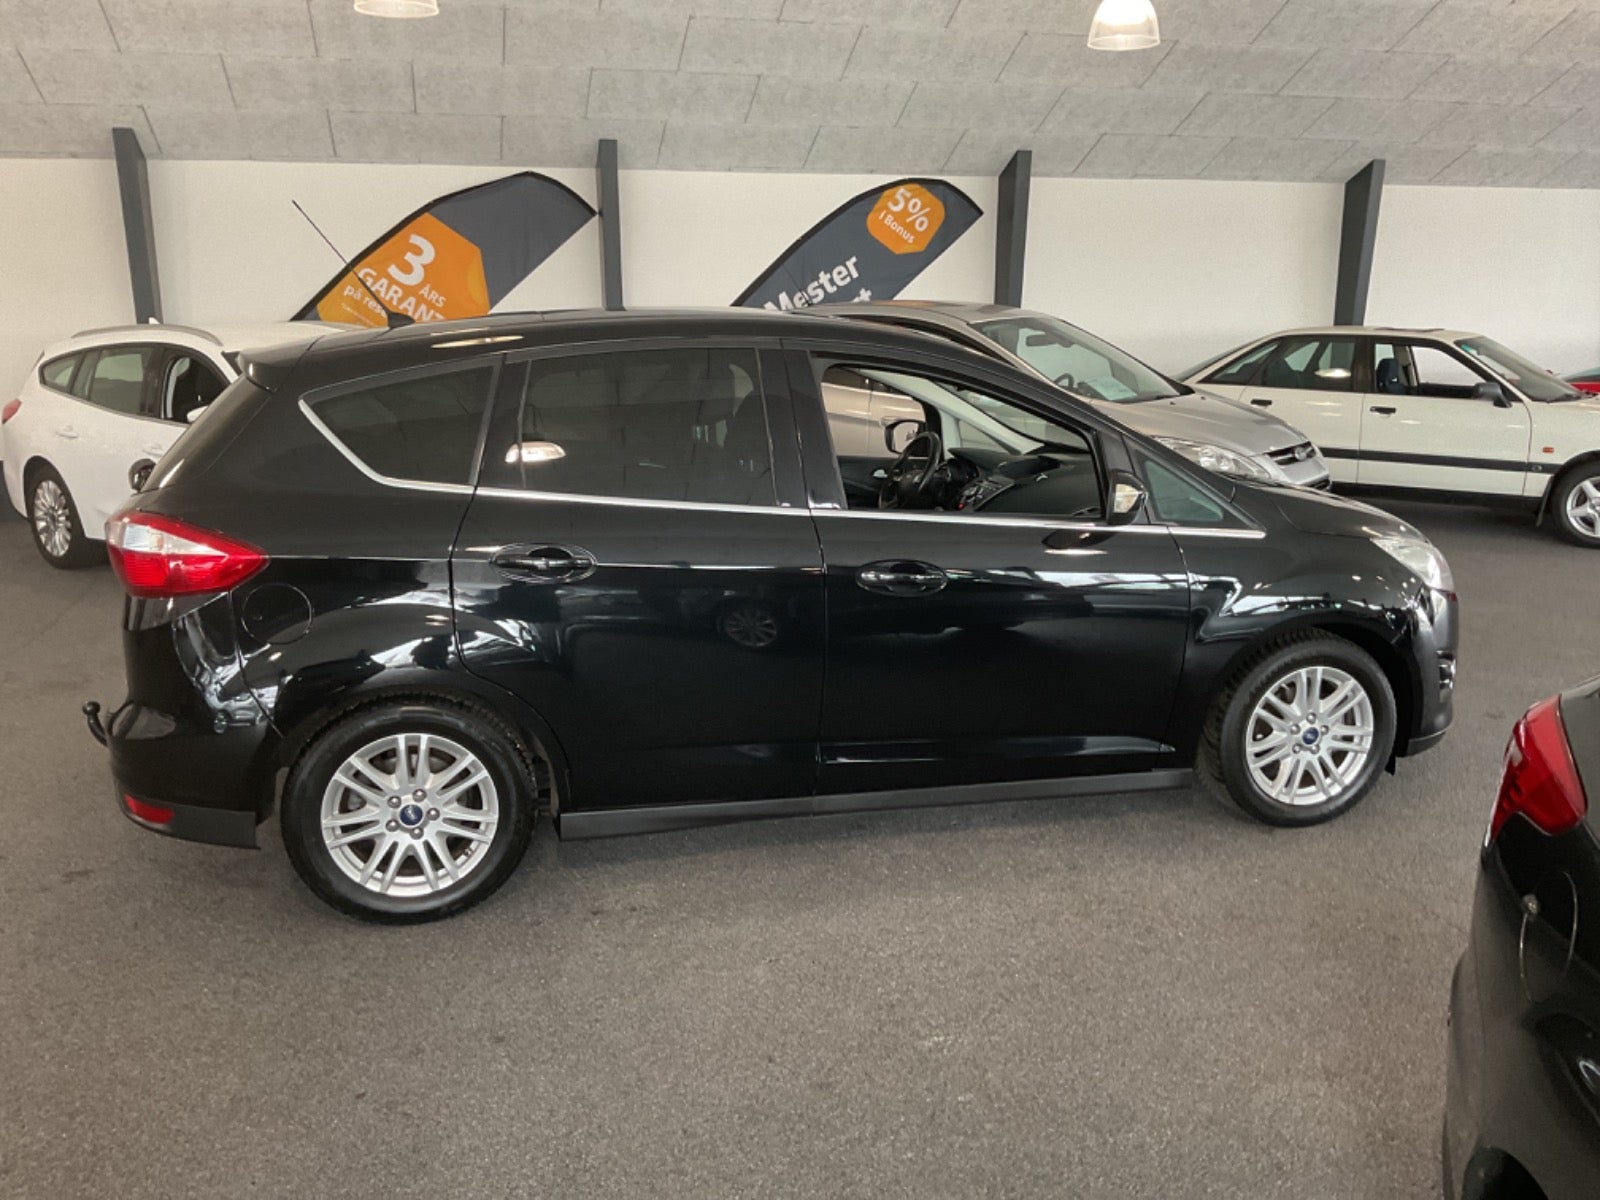 Ford C-MAX 2014